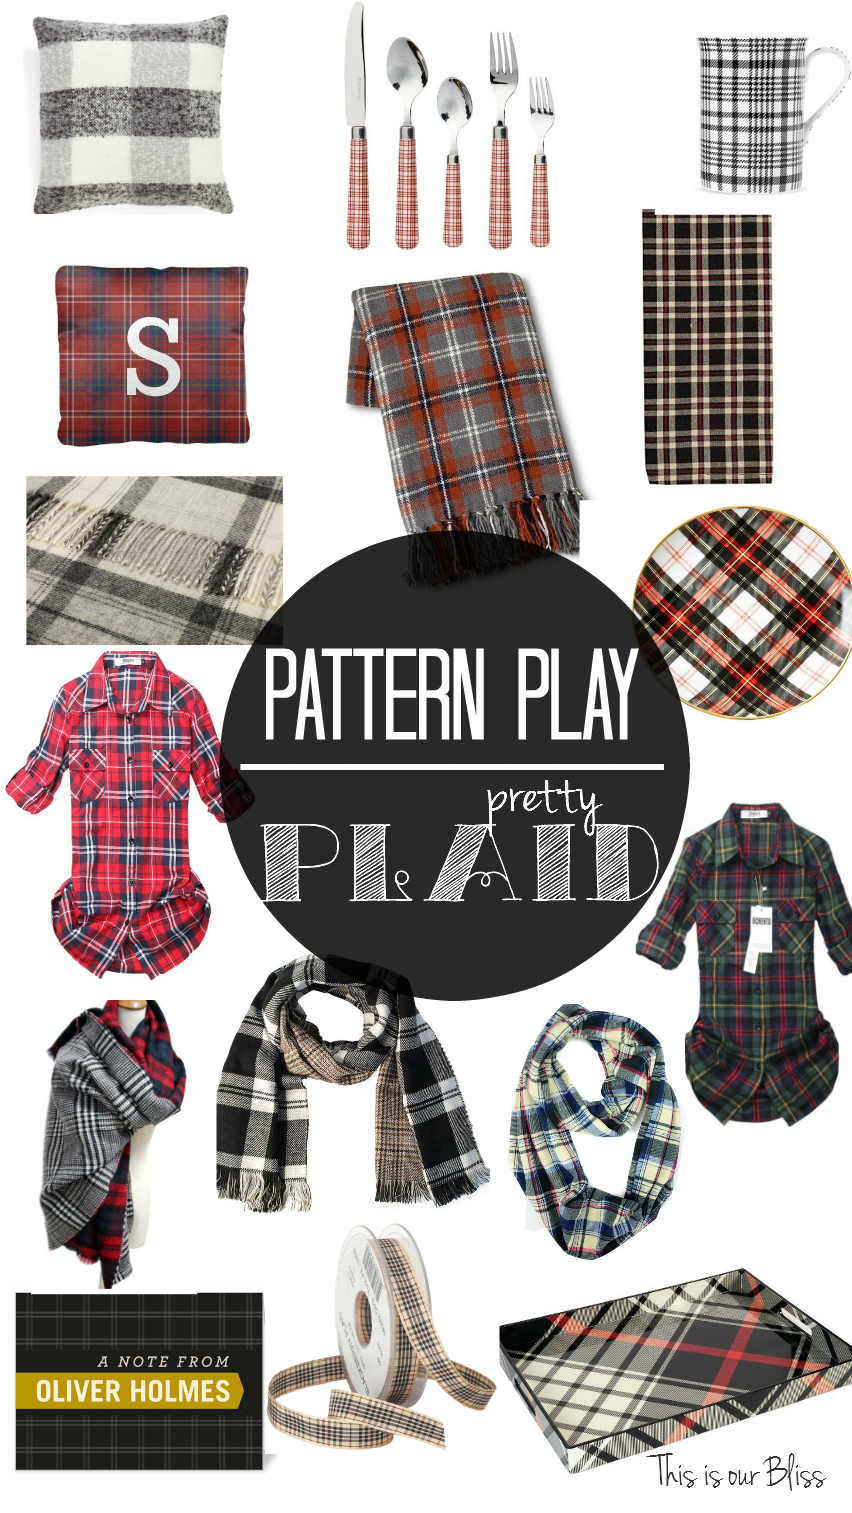 Pattern play pretty plaid fall plaid round up for the home and closet 1 This is our Bliss